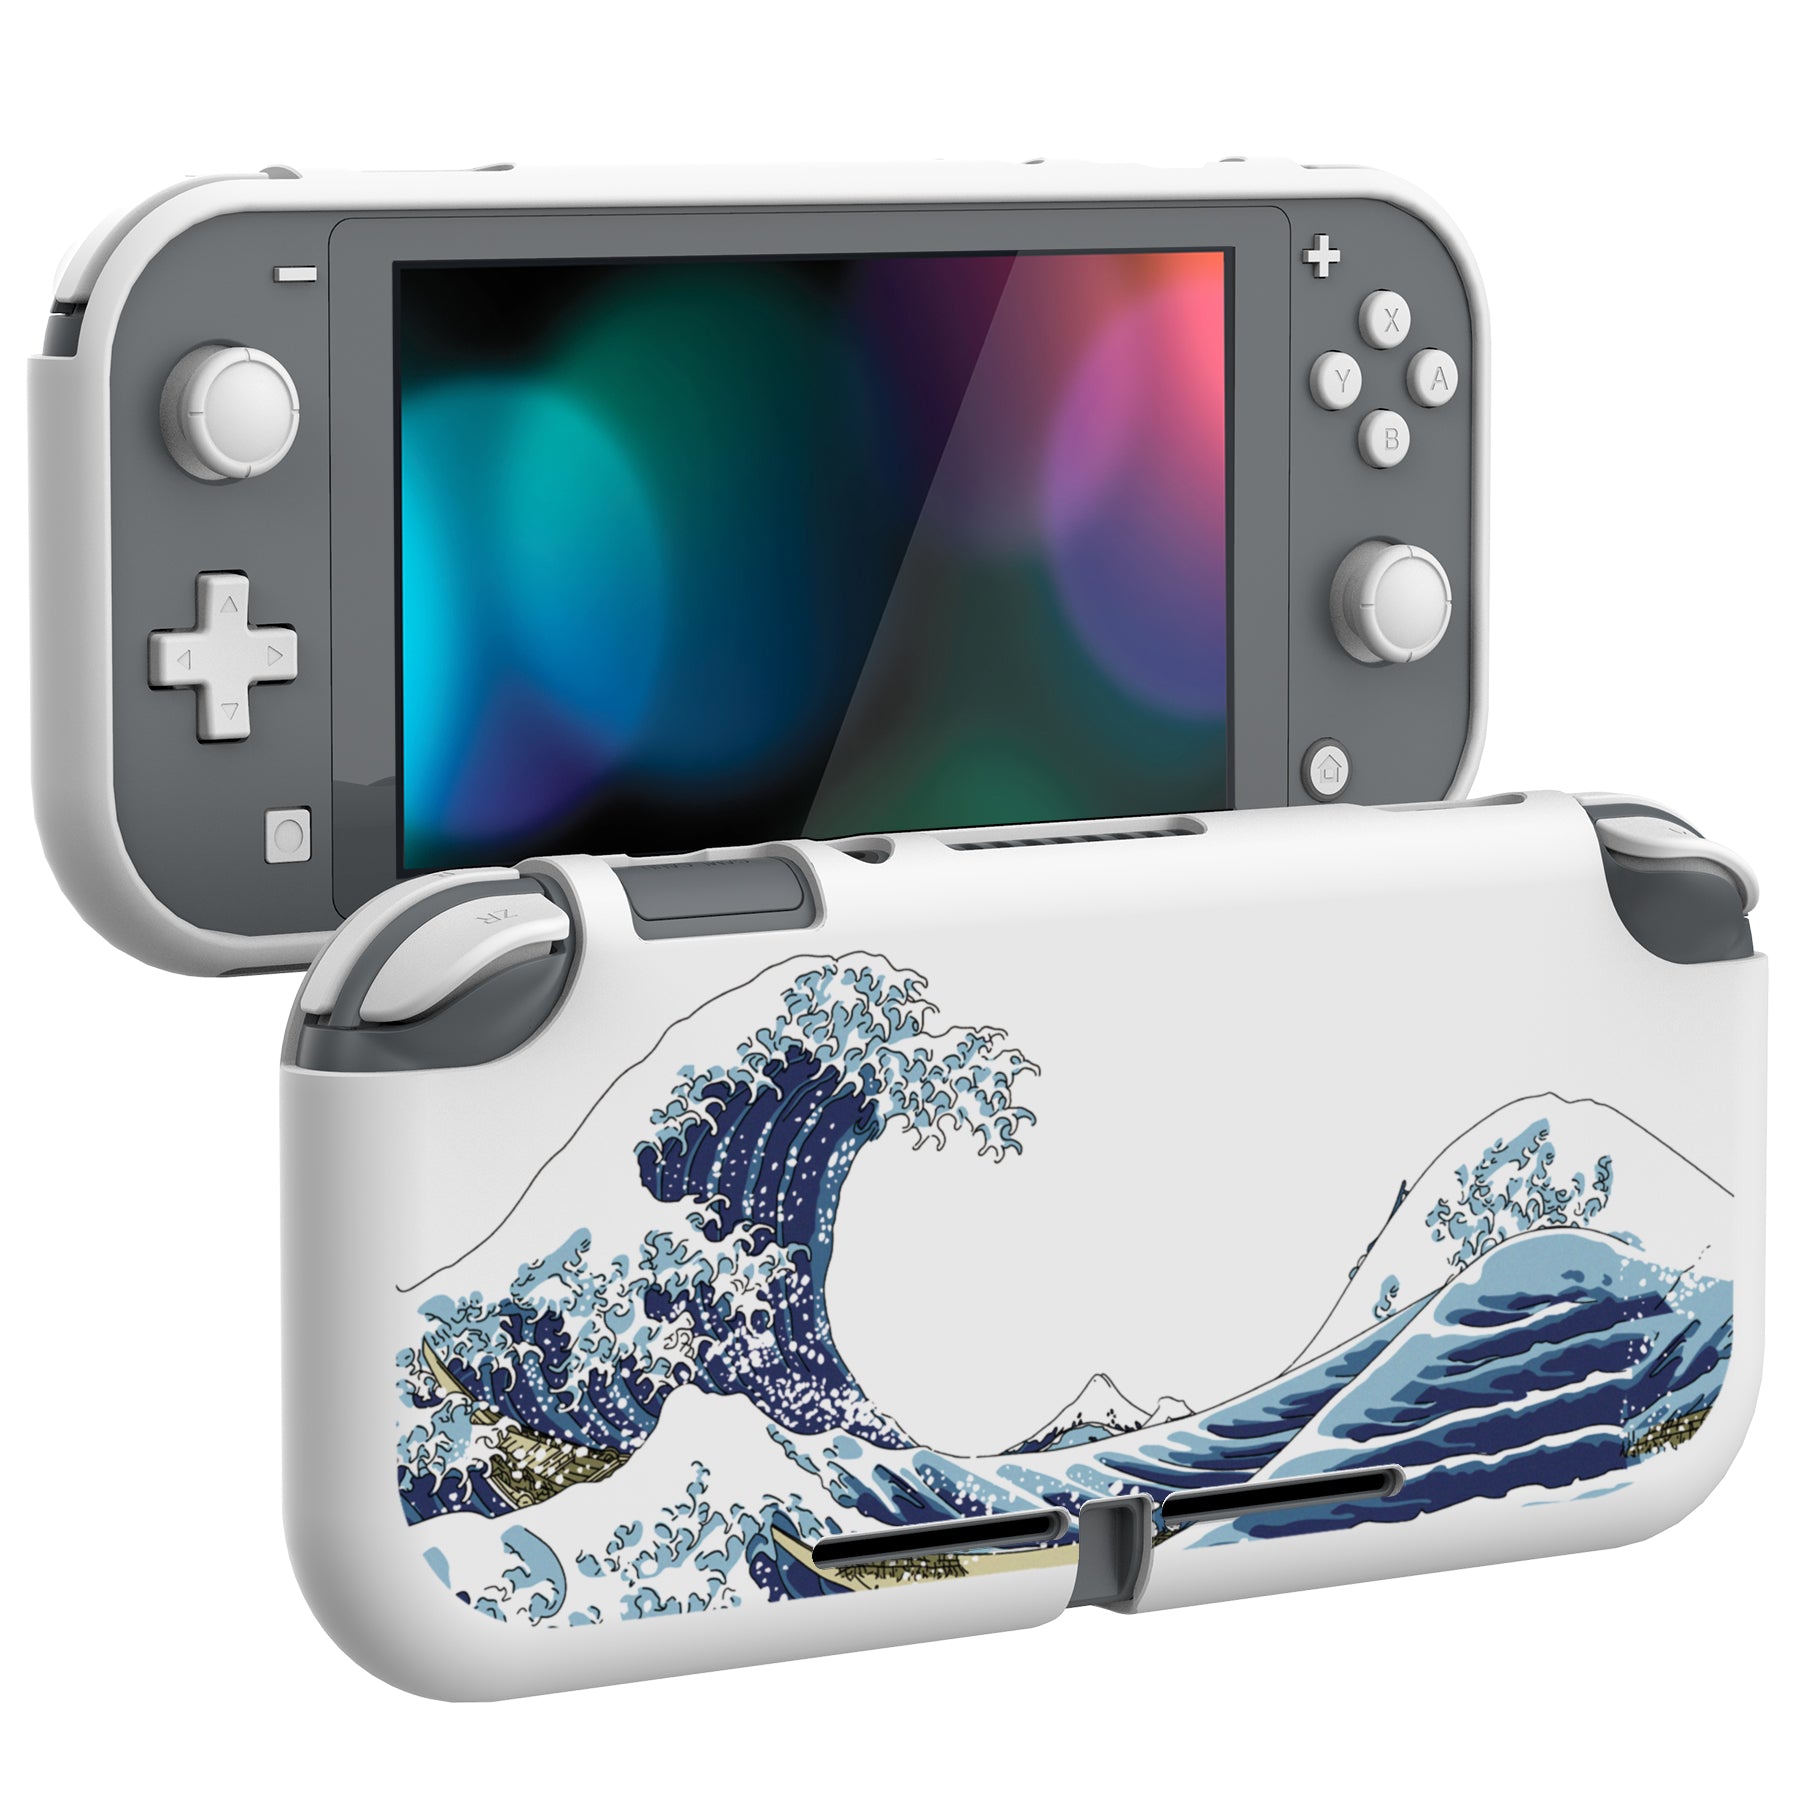 PlayVital The Great Wave Custom Protective Case for Nintendo Switch Lite, Soft TPU Slim Case Cover for Nintendo Switch Lite- LTU6017 PlayVital